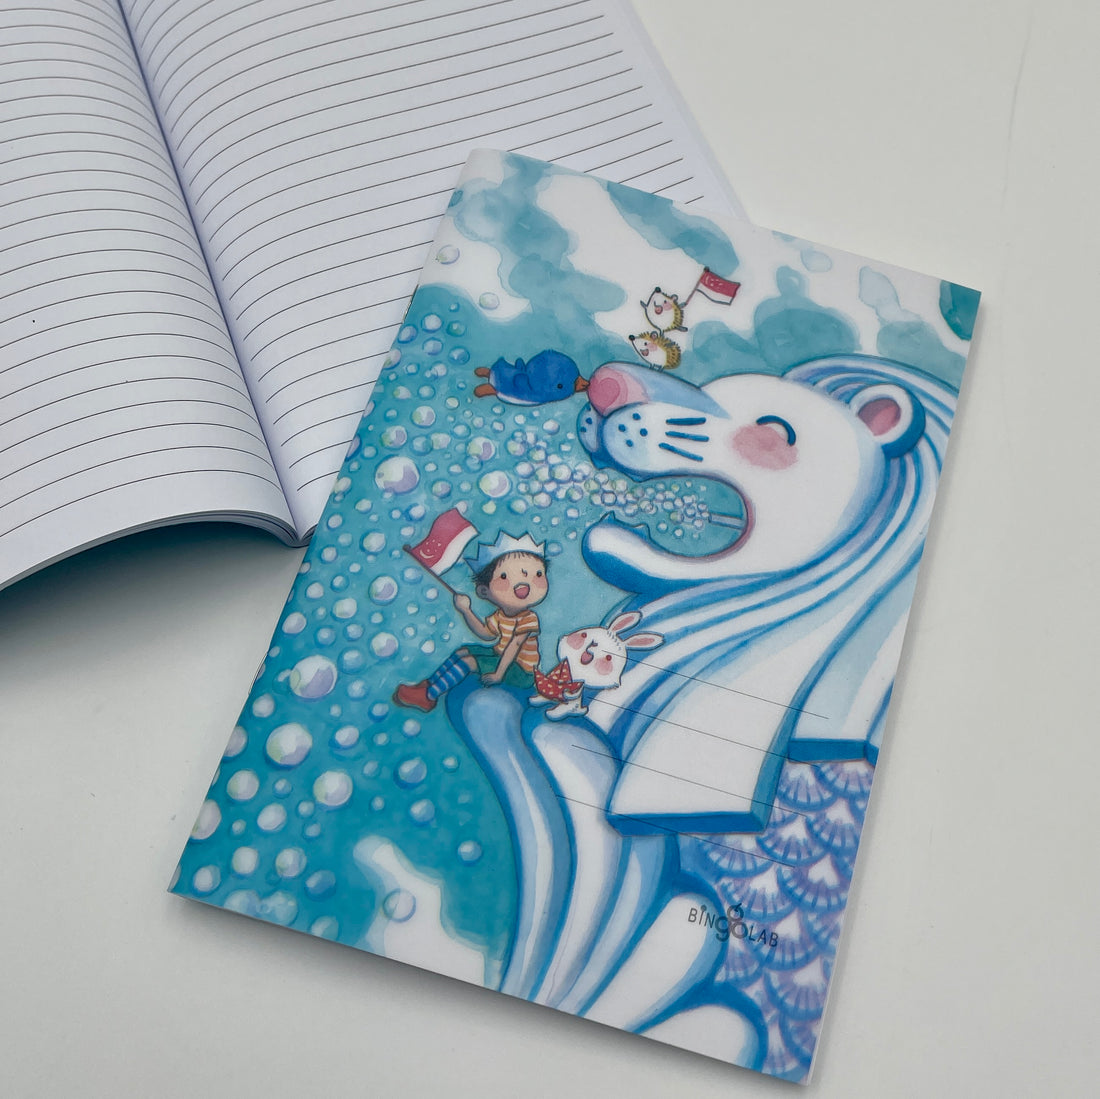 Ah Guo Merlion Big Love A5 Ruled Notebook (58 Sheets)